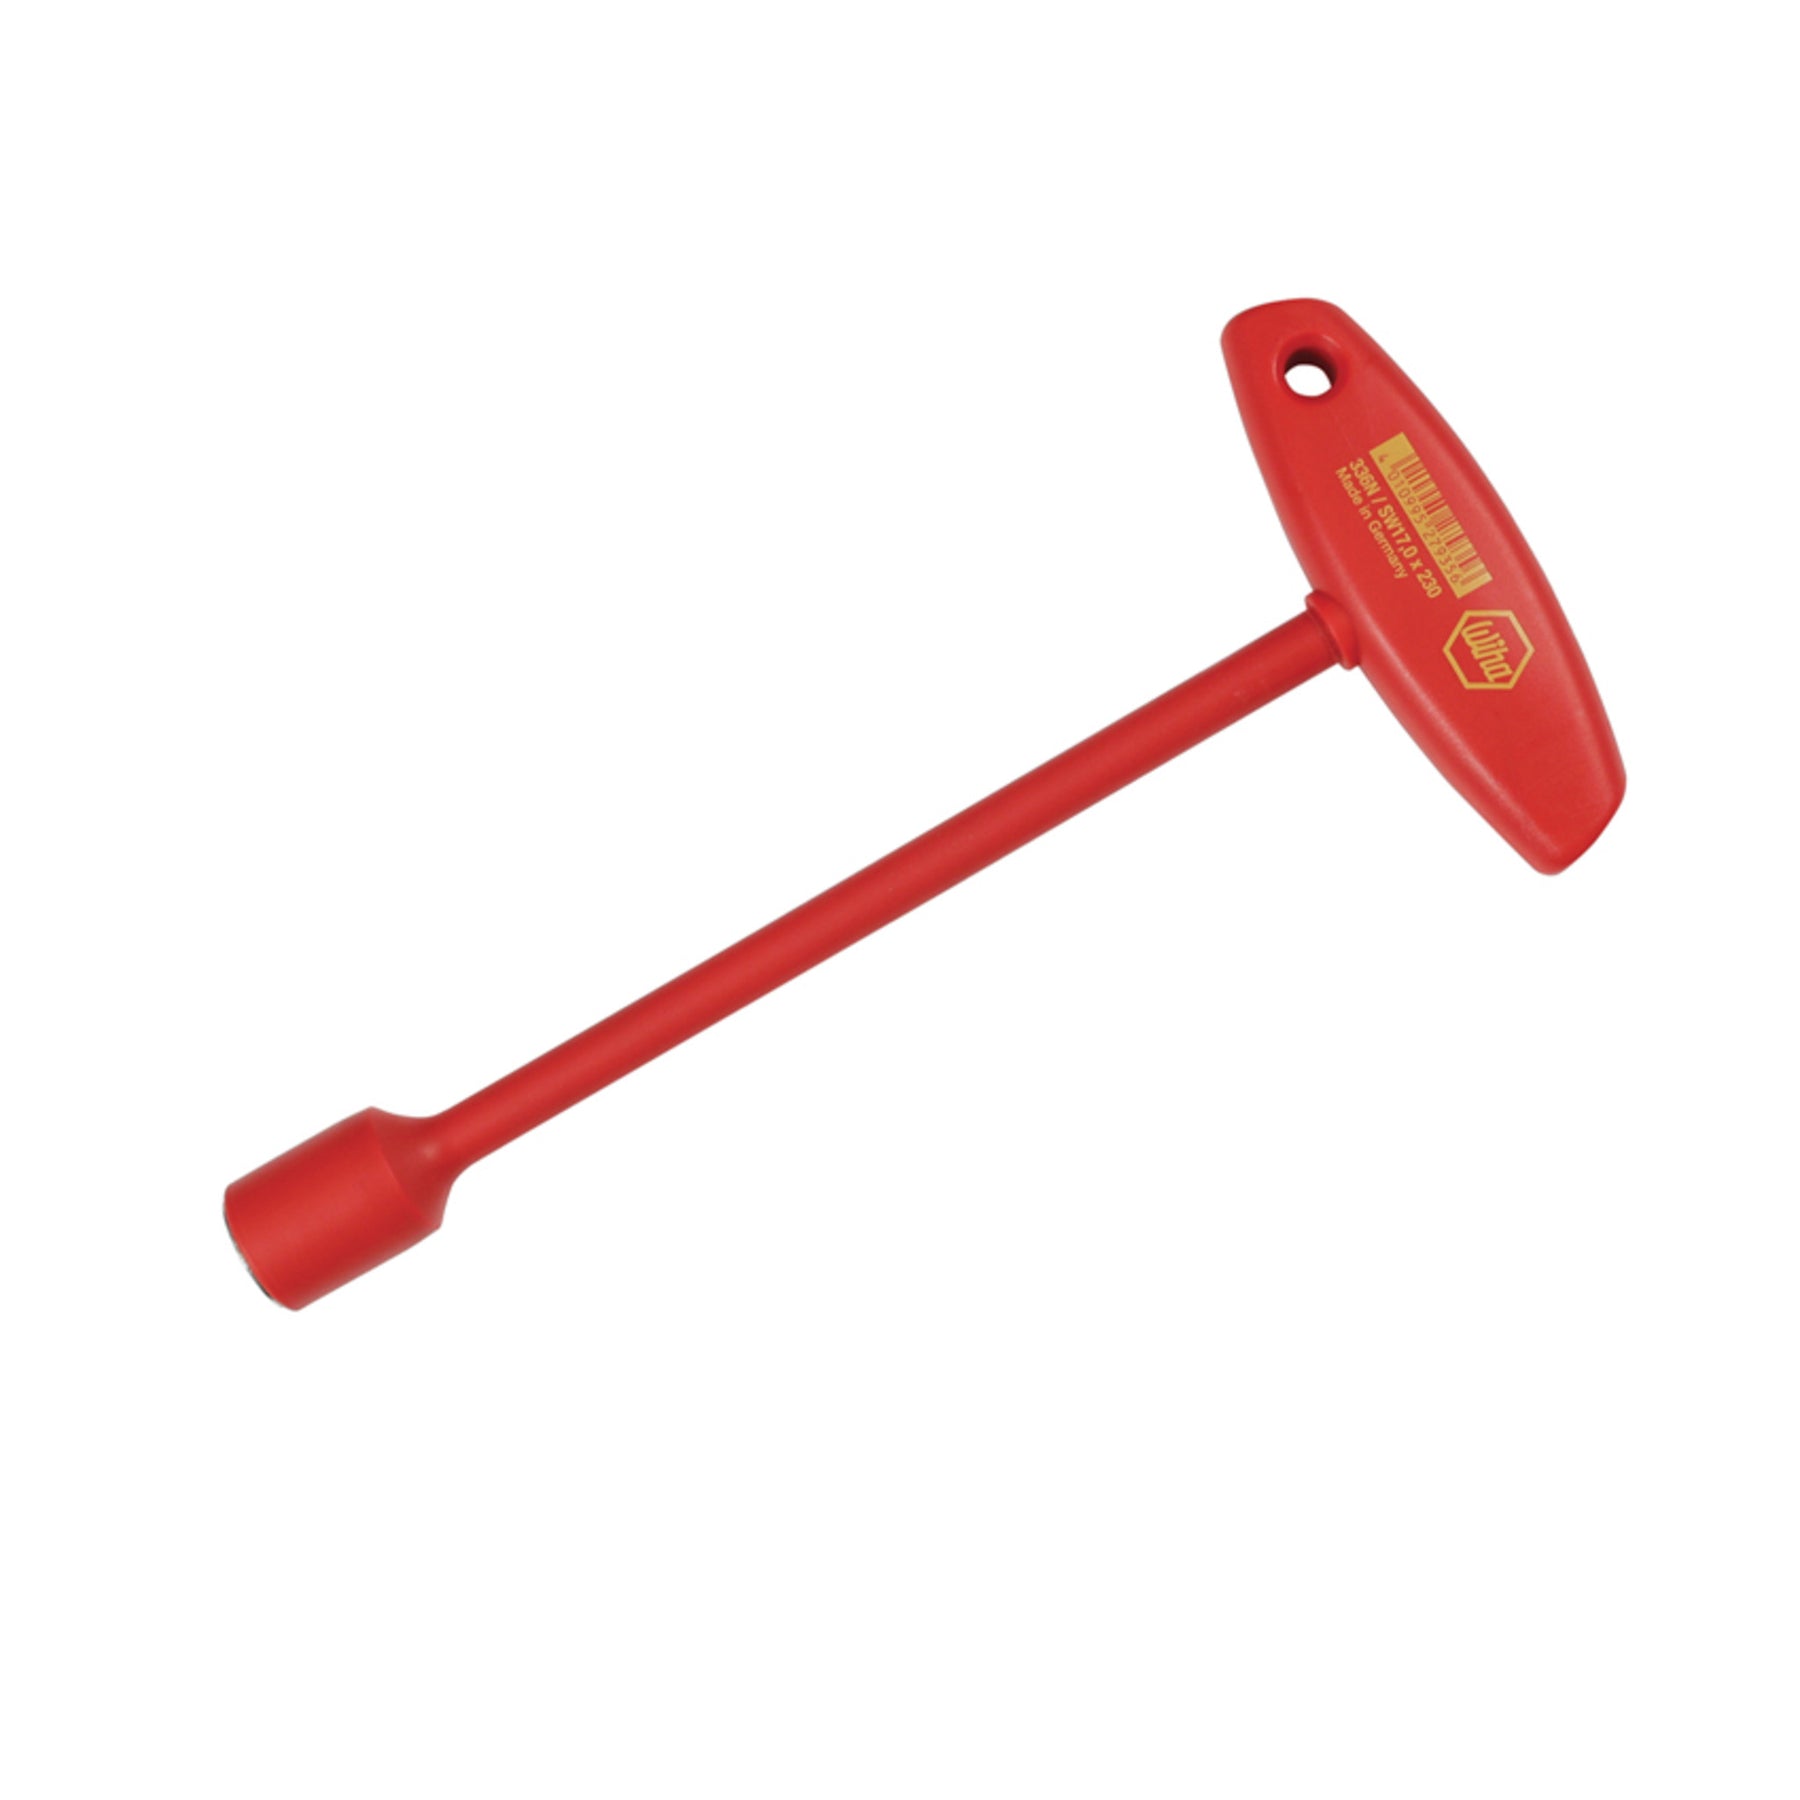 Wiha 33641 Insulated T-Handle Nut Driver 17.0mm